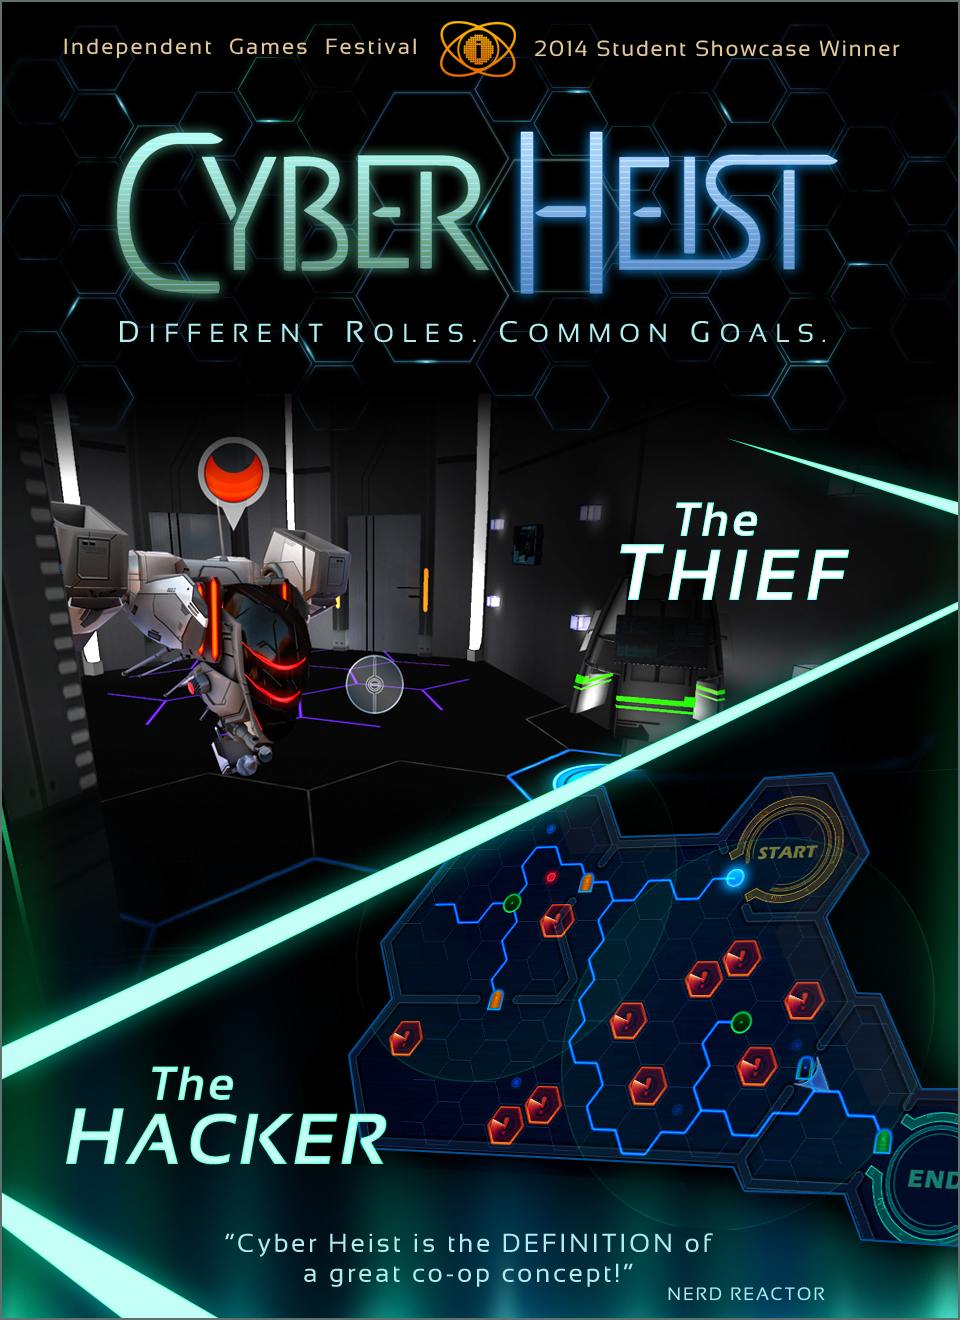 Play IGF Student Showcase Award winner Cyber Heist at the annual EAE Fest on April 24th from 2-5pm, or download now from desura.com.